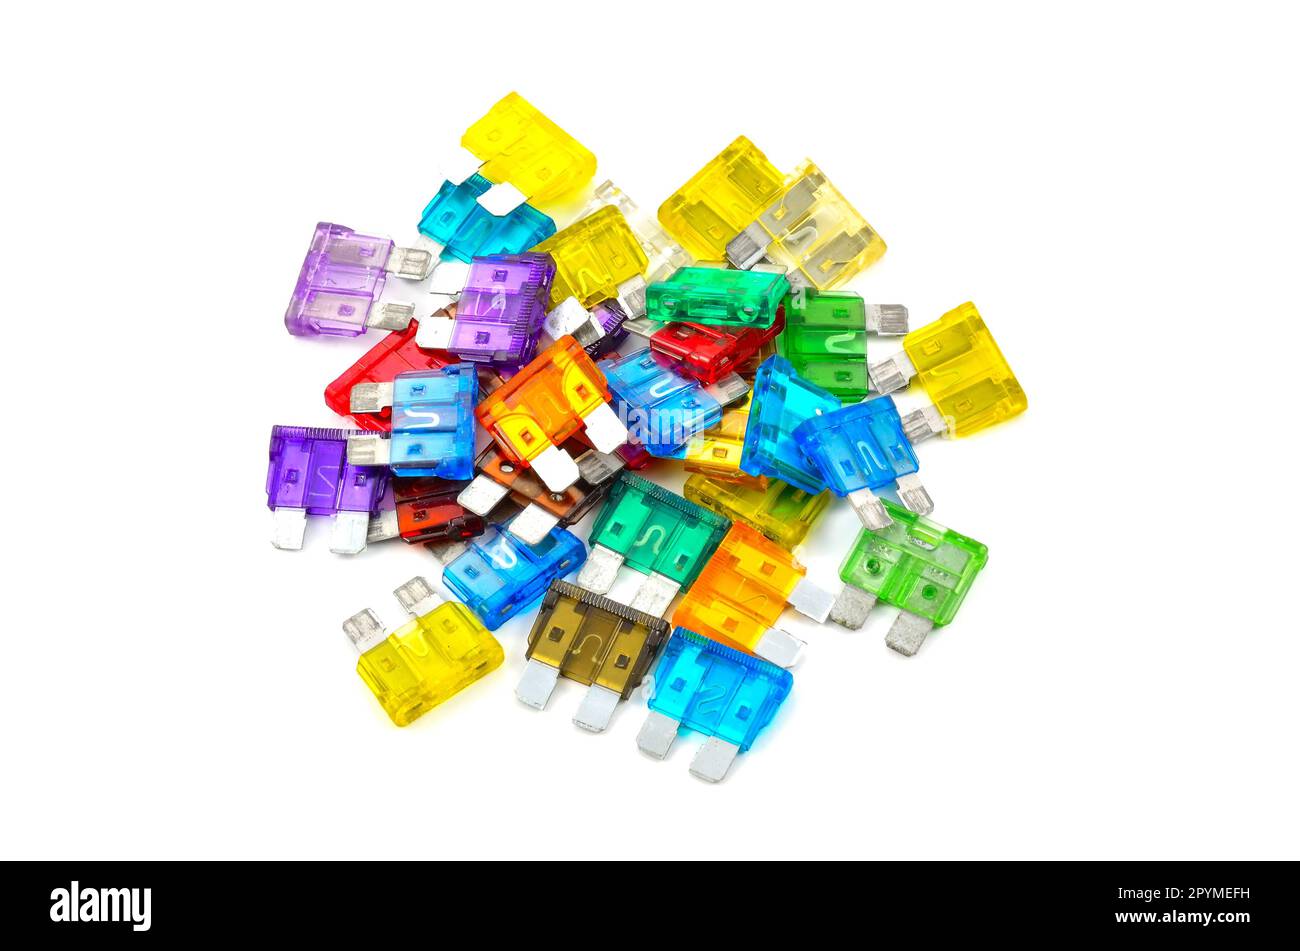 Color car fuse. Pile of colorful electrical automotive fuses or circuit breakers isolated on white background. Stock Photo